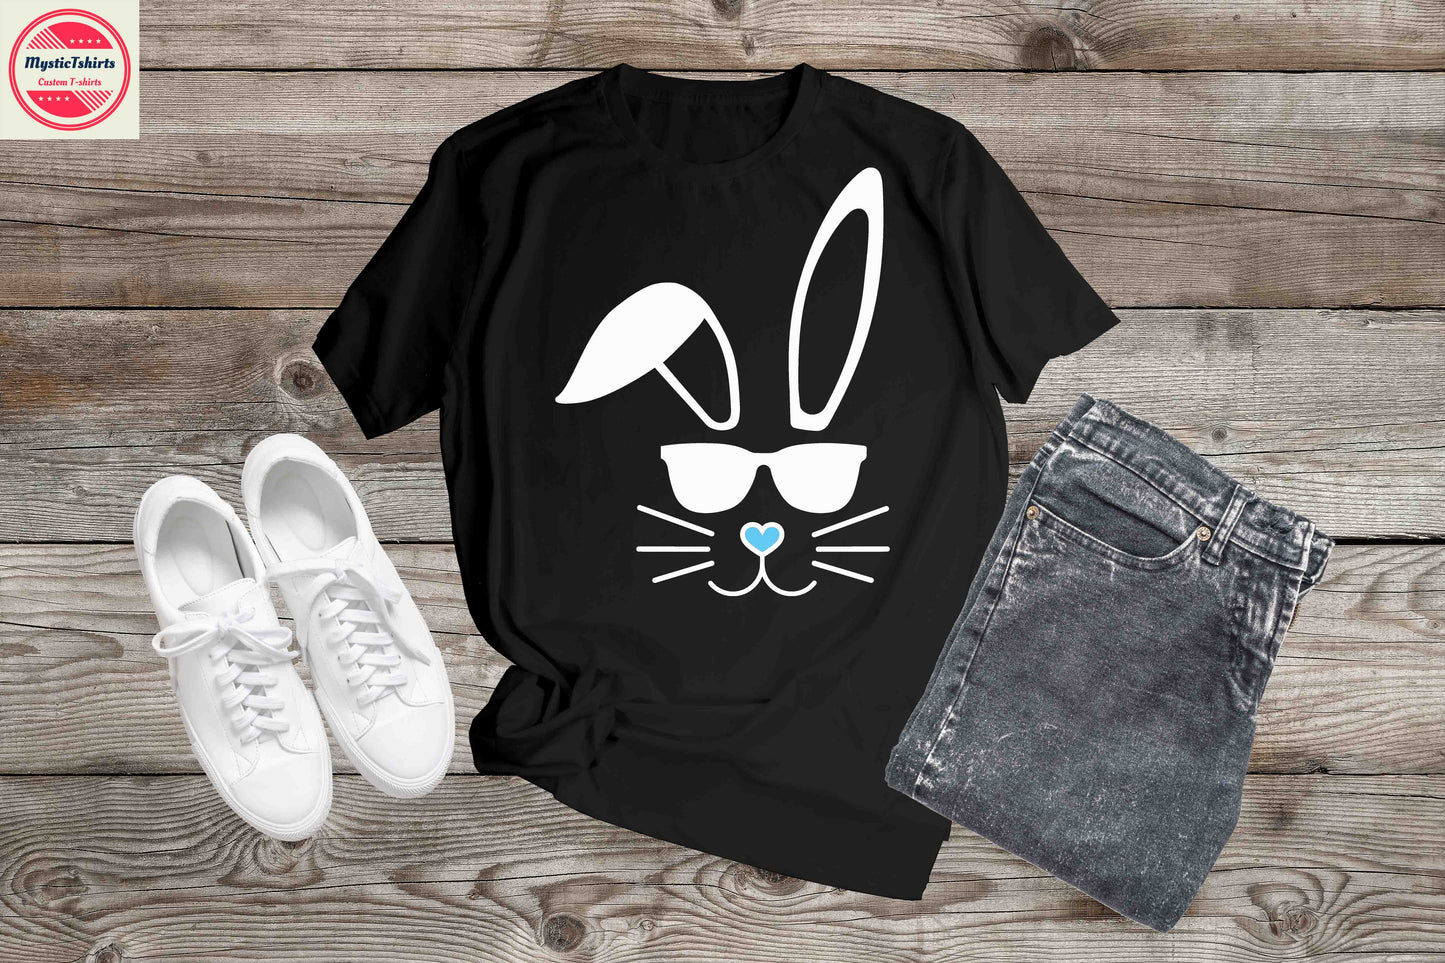 040. Bunny Face, Custom Made Shirt, Personalized T-Shirt, Custom Text, Make Your Own Shirt, Custom Tee